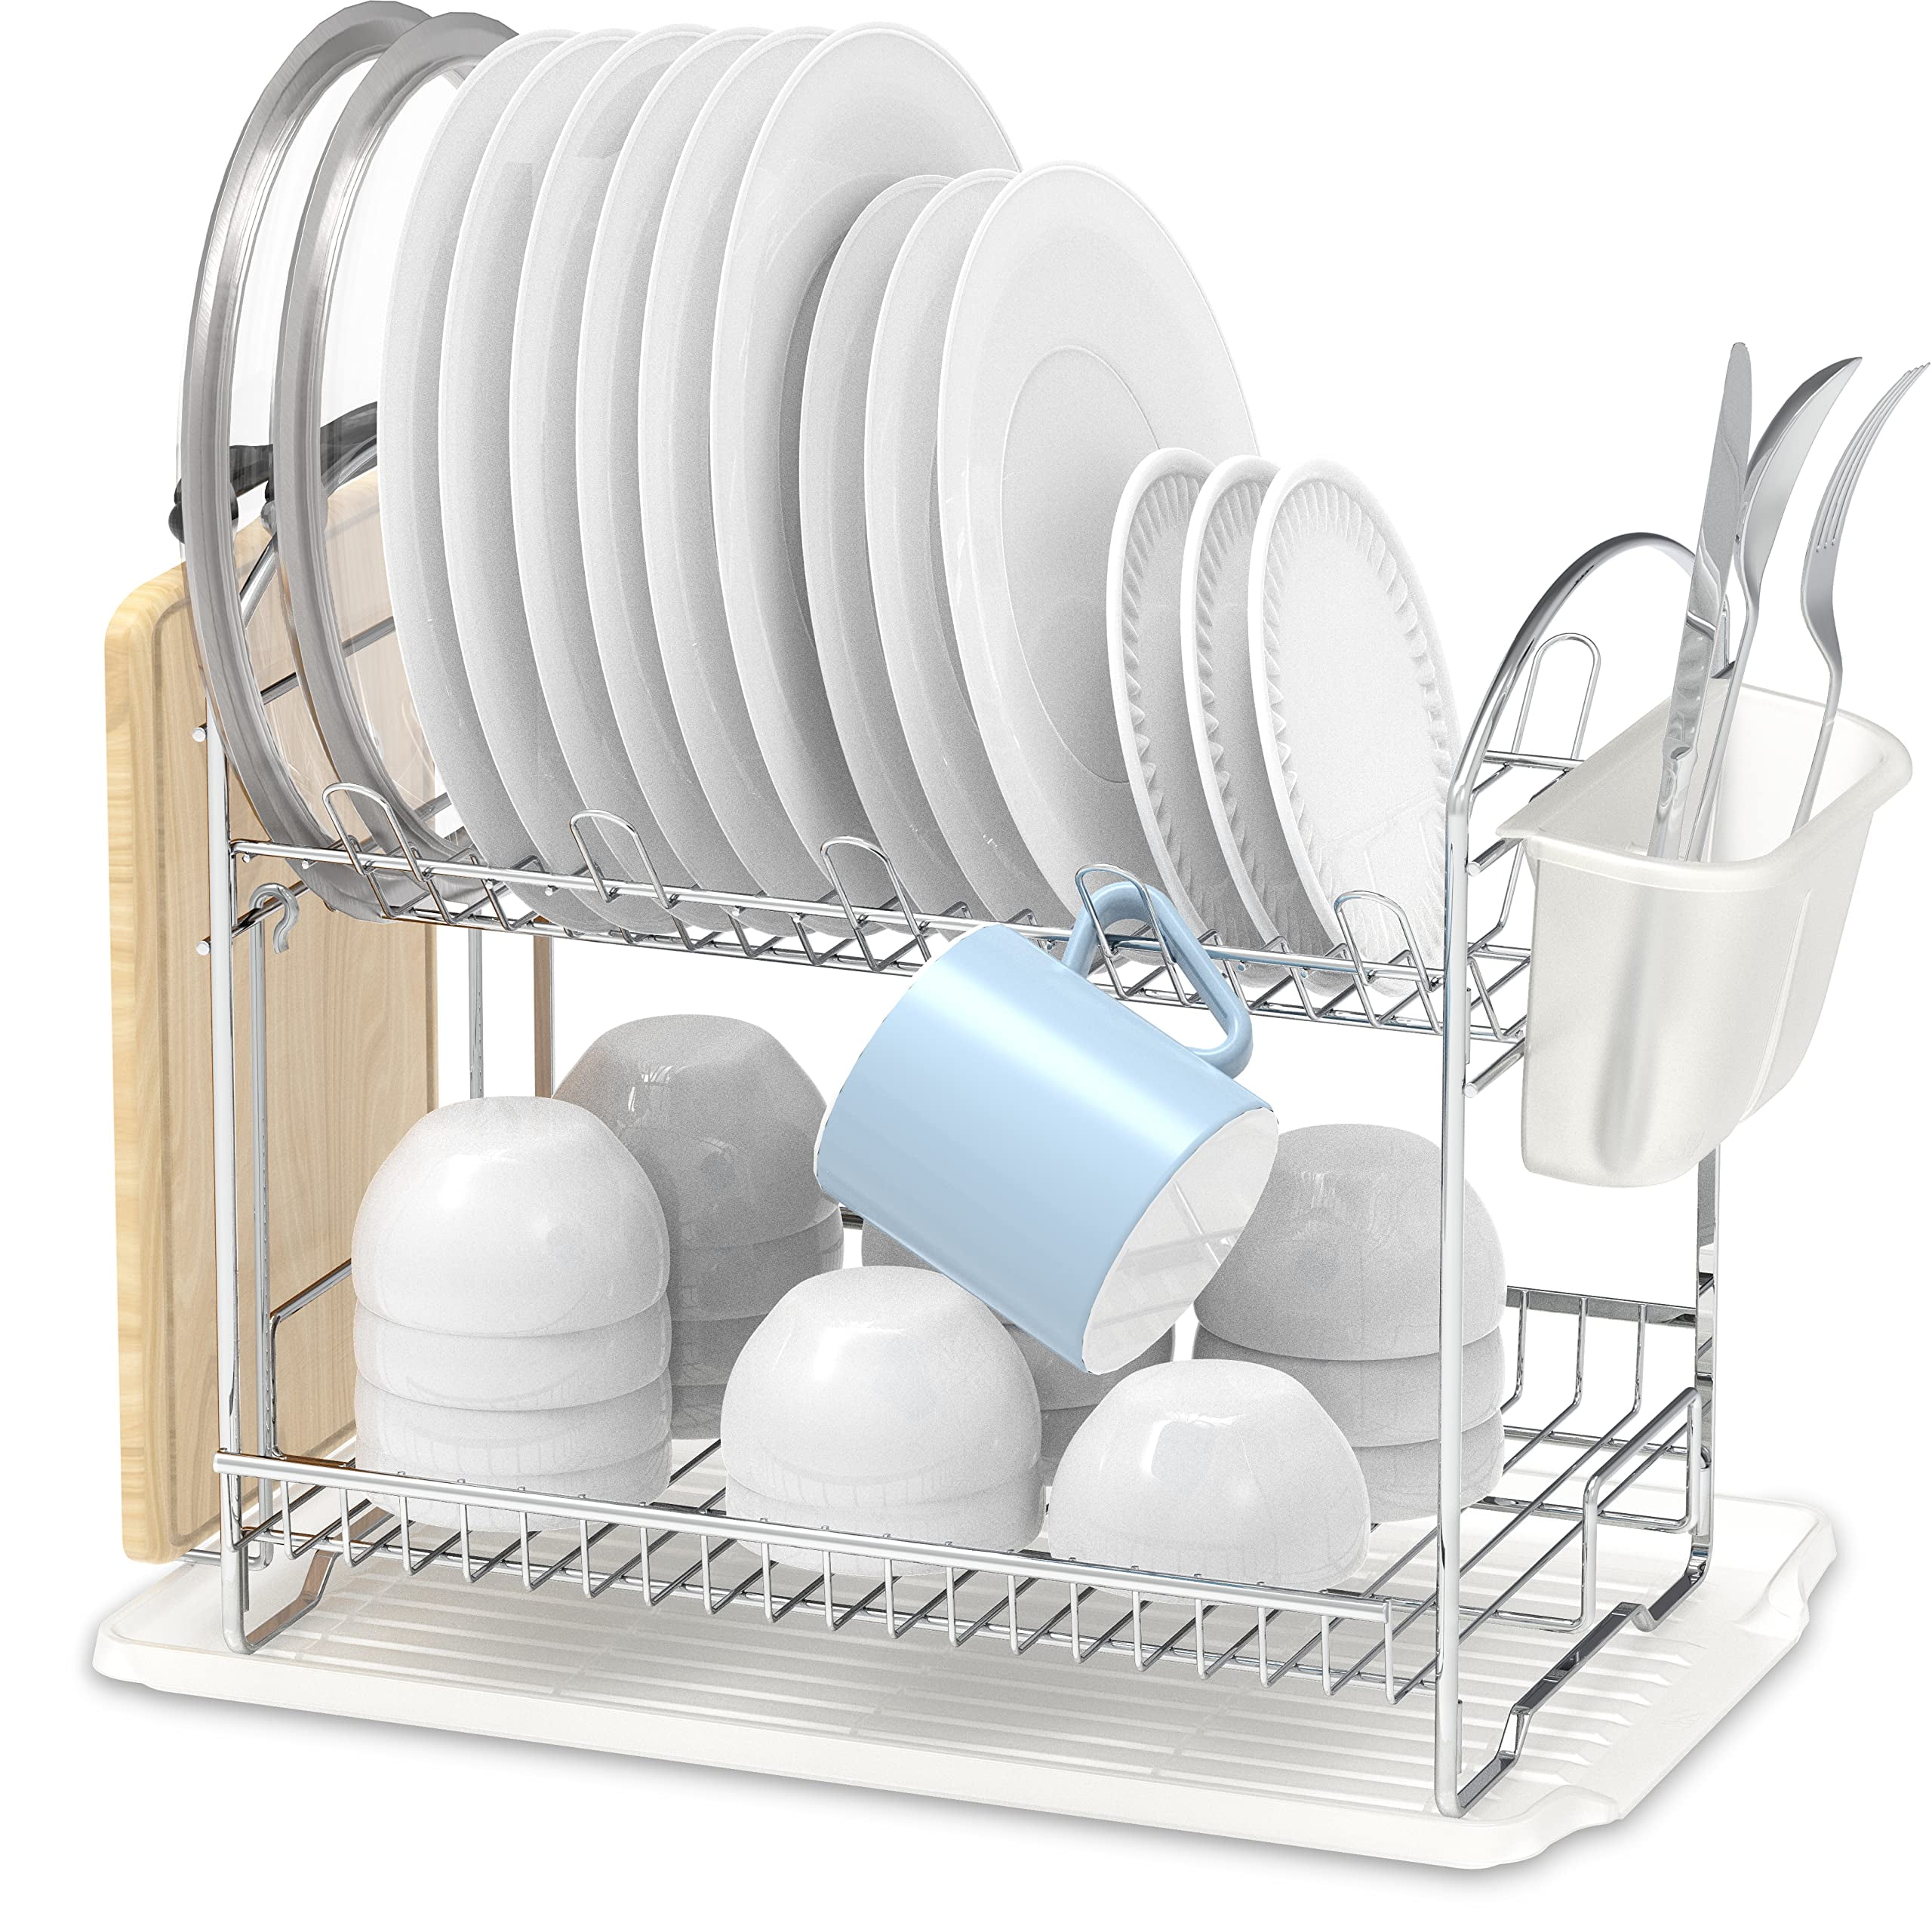 Simple Houseware Over Sink Counter Top Dish Drainer Drying Rack, Chrome